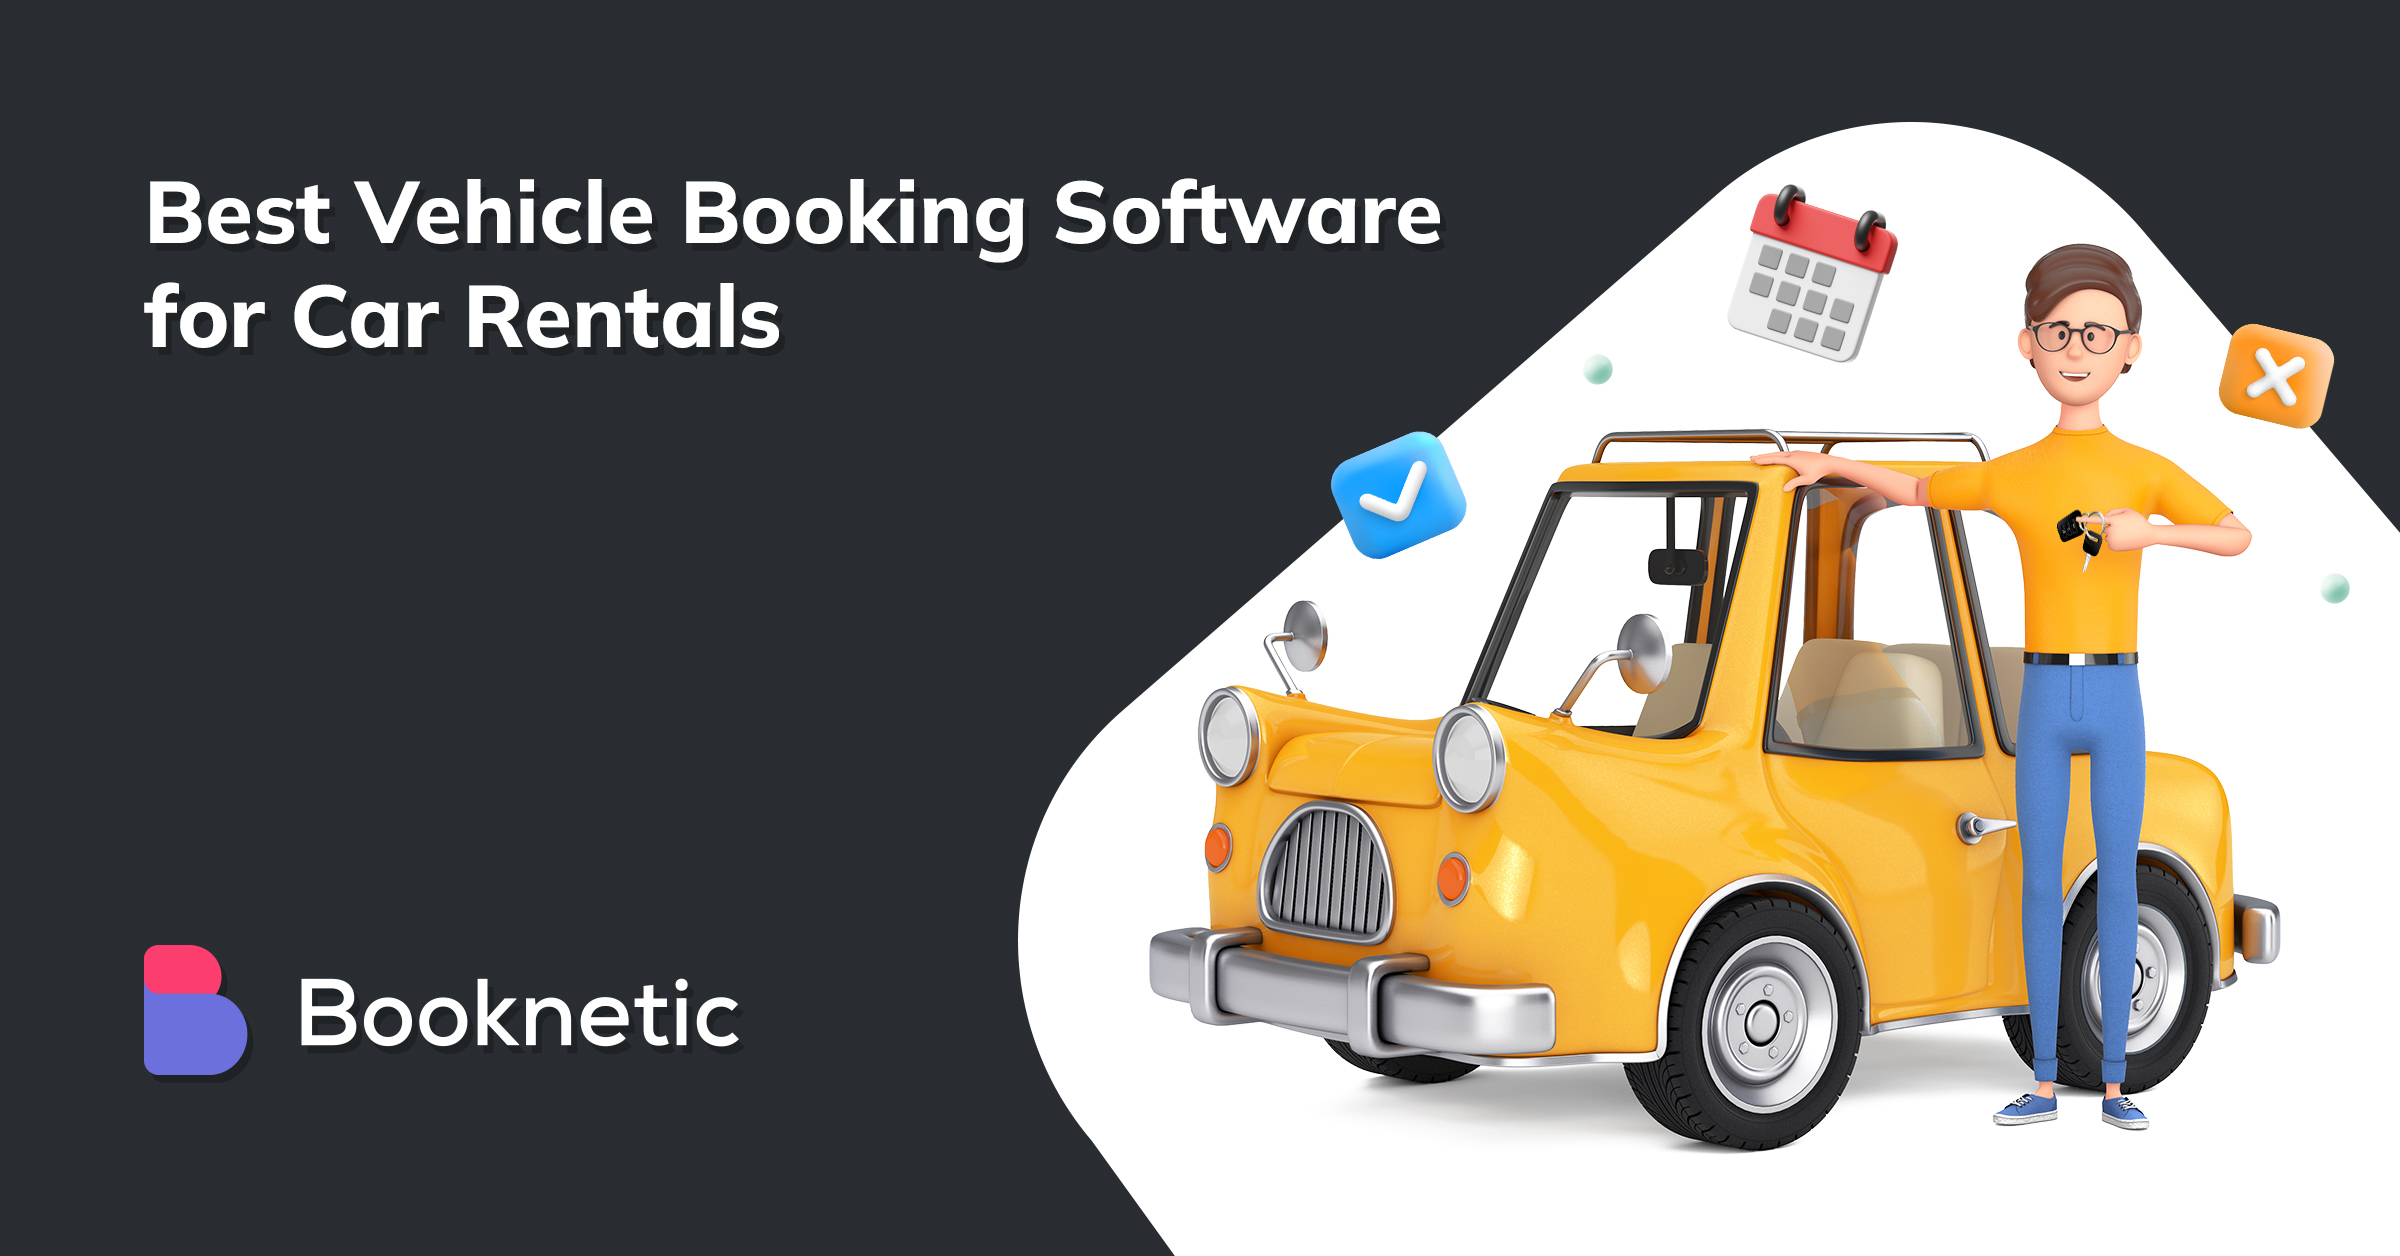 Best Vehicle Booking Software for Car Rentals